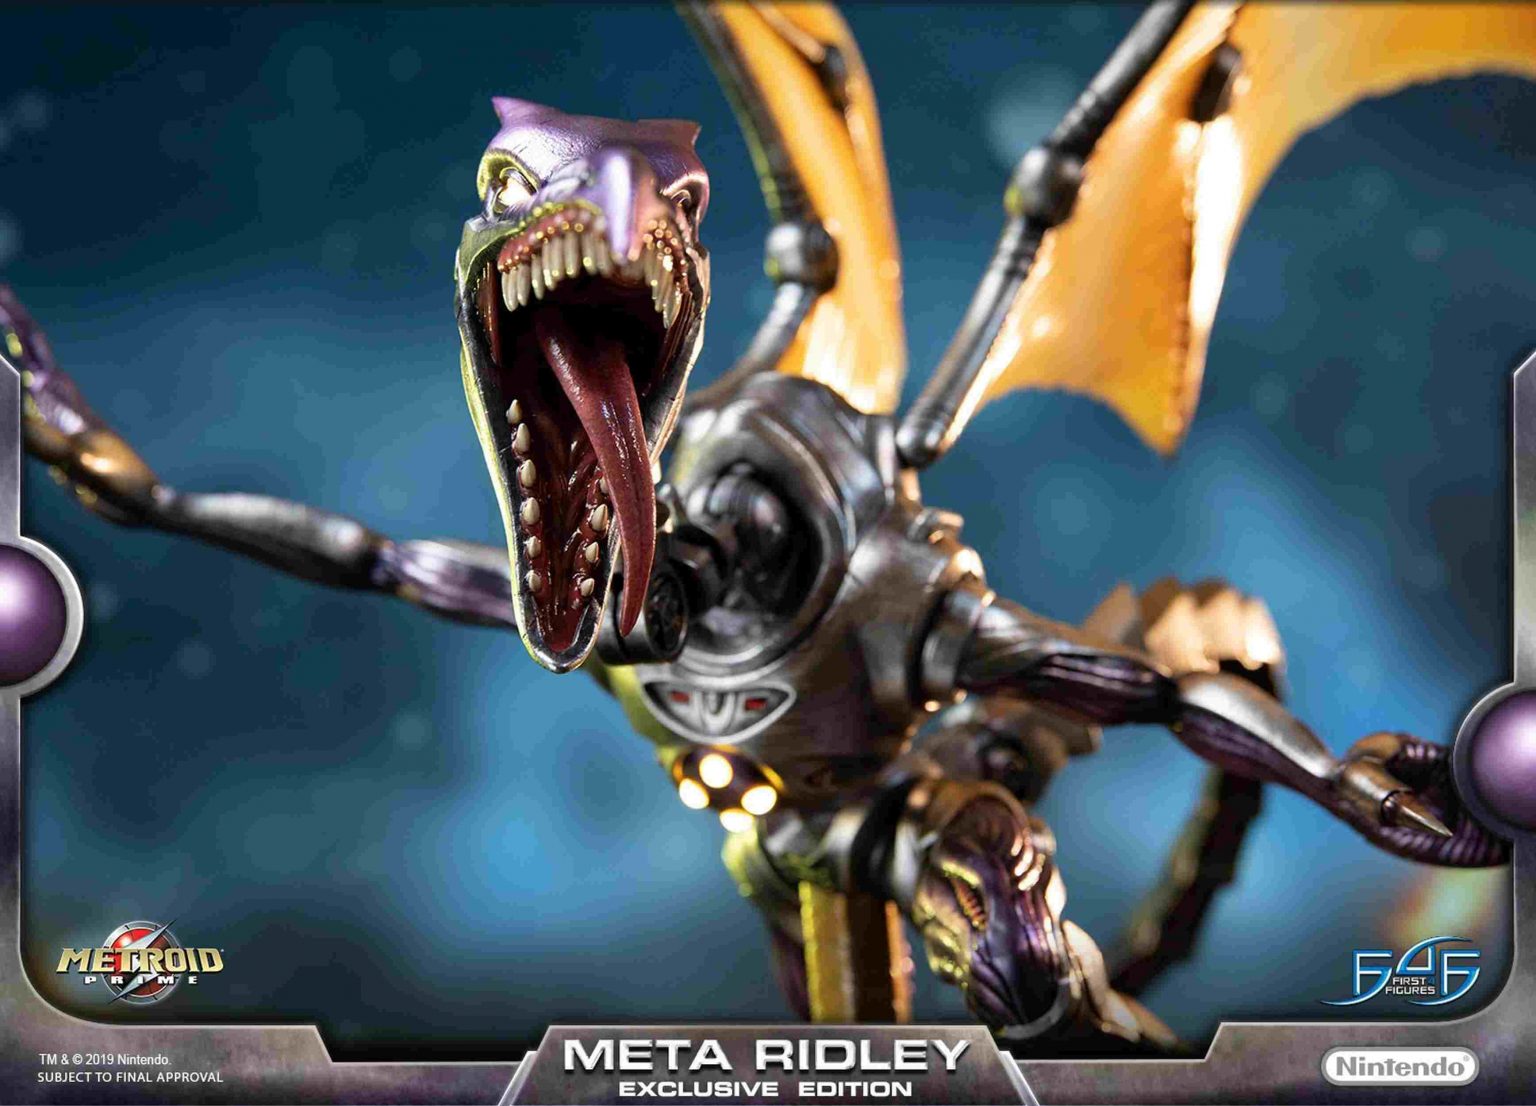 Metroid Prime Meta Ridley From First4Figures – YBMW